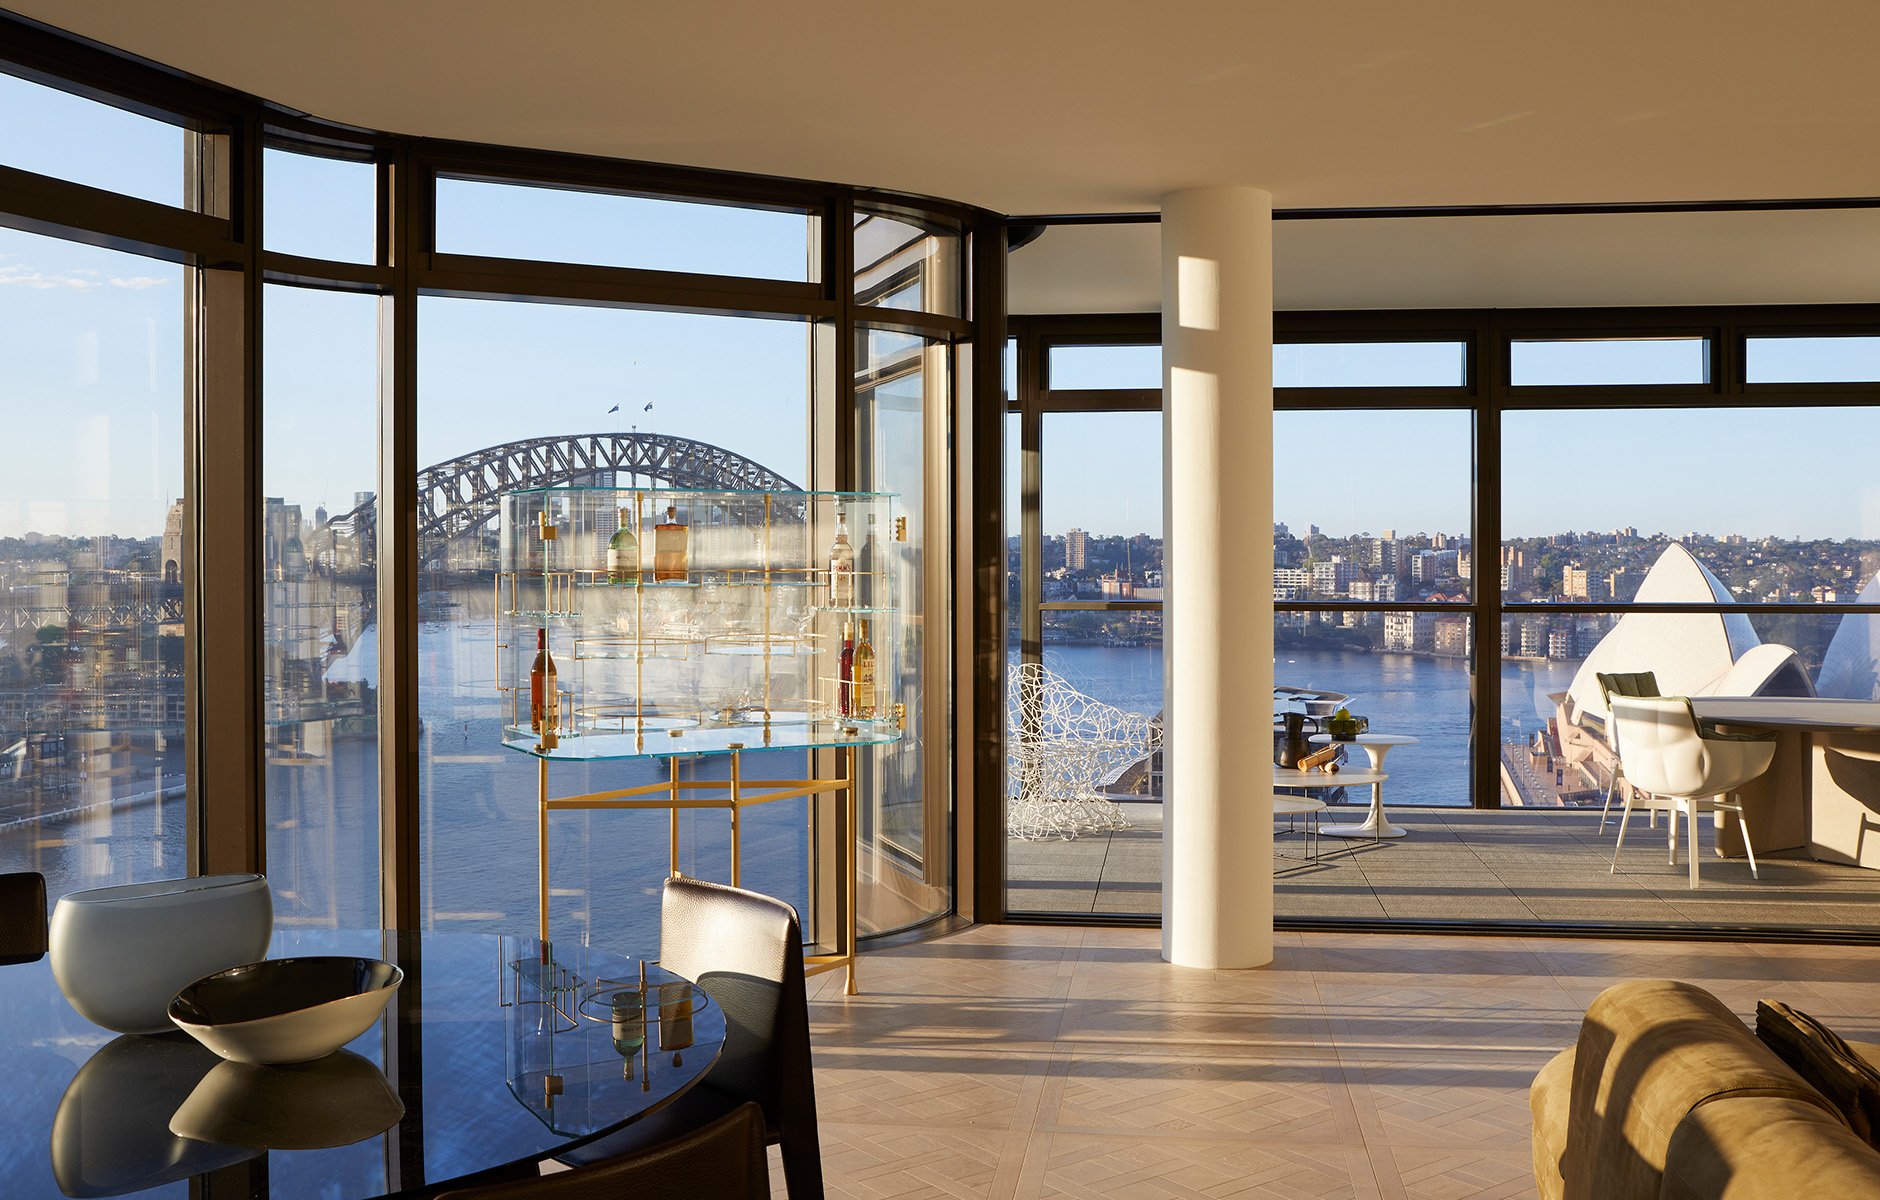 With expansive views from the city to the Harbour Bridge, Sydney Opera House and Botanic Gardens, the main living room also features the Float bar cabinet by Baxter, and the Husk outdoor chairs and Tobi-Ishi table by B&B Italia on the balcony. Photo © Martin Mischkulning.